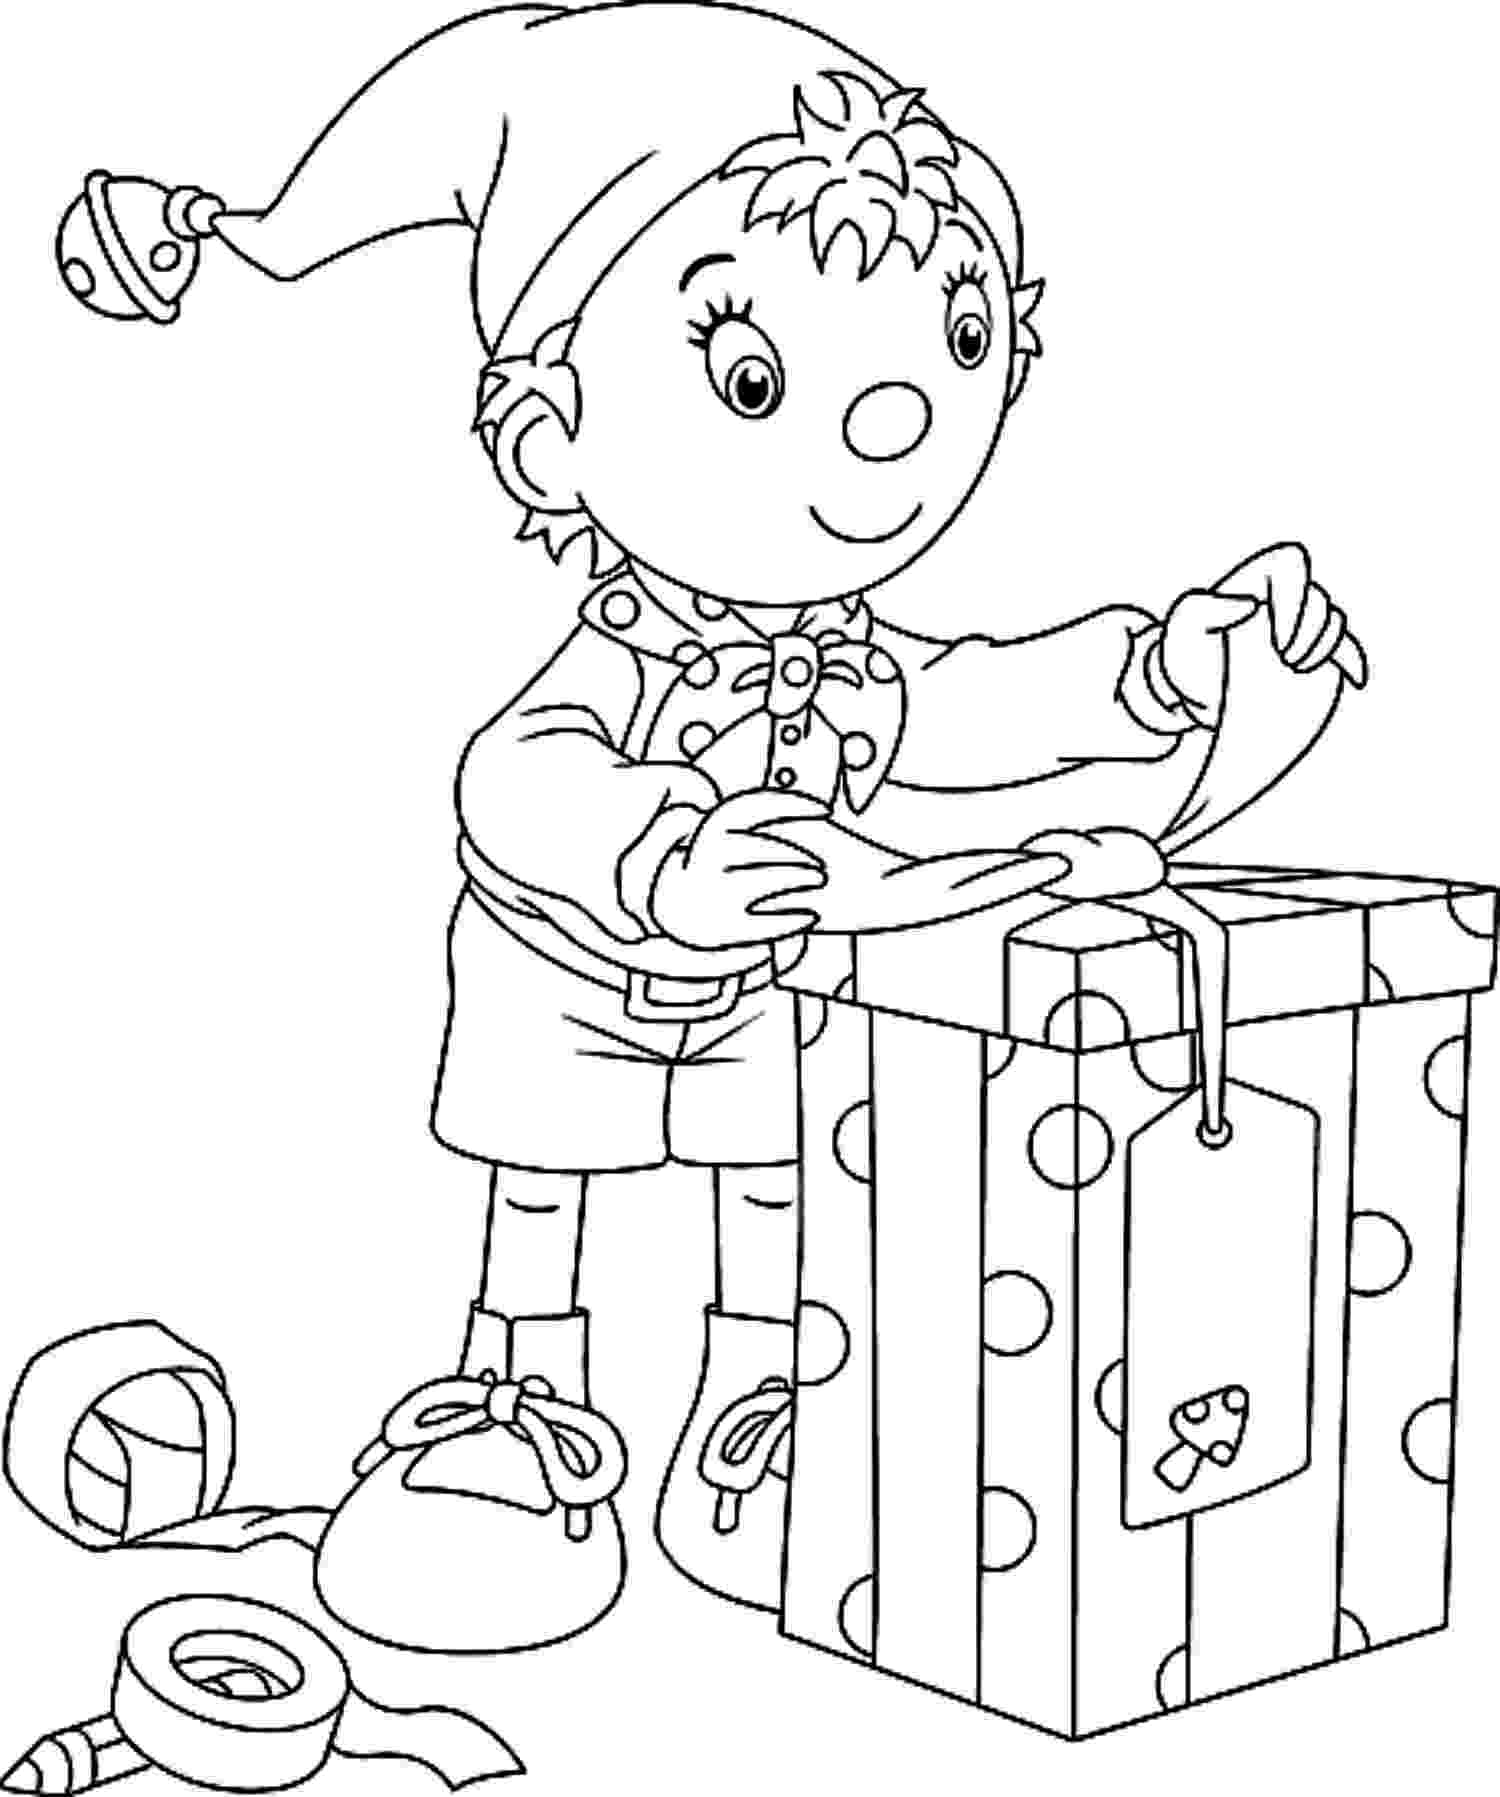 free christmas color pages hello kitty christmas coloring page free printable pages christmas color free 